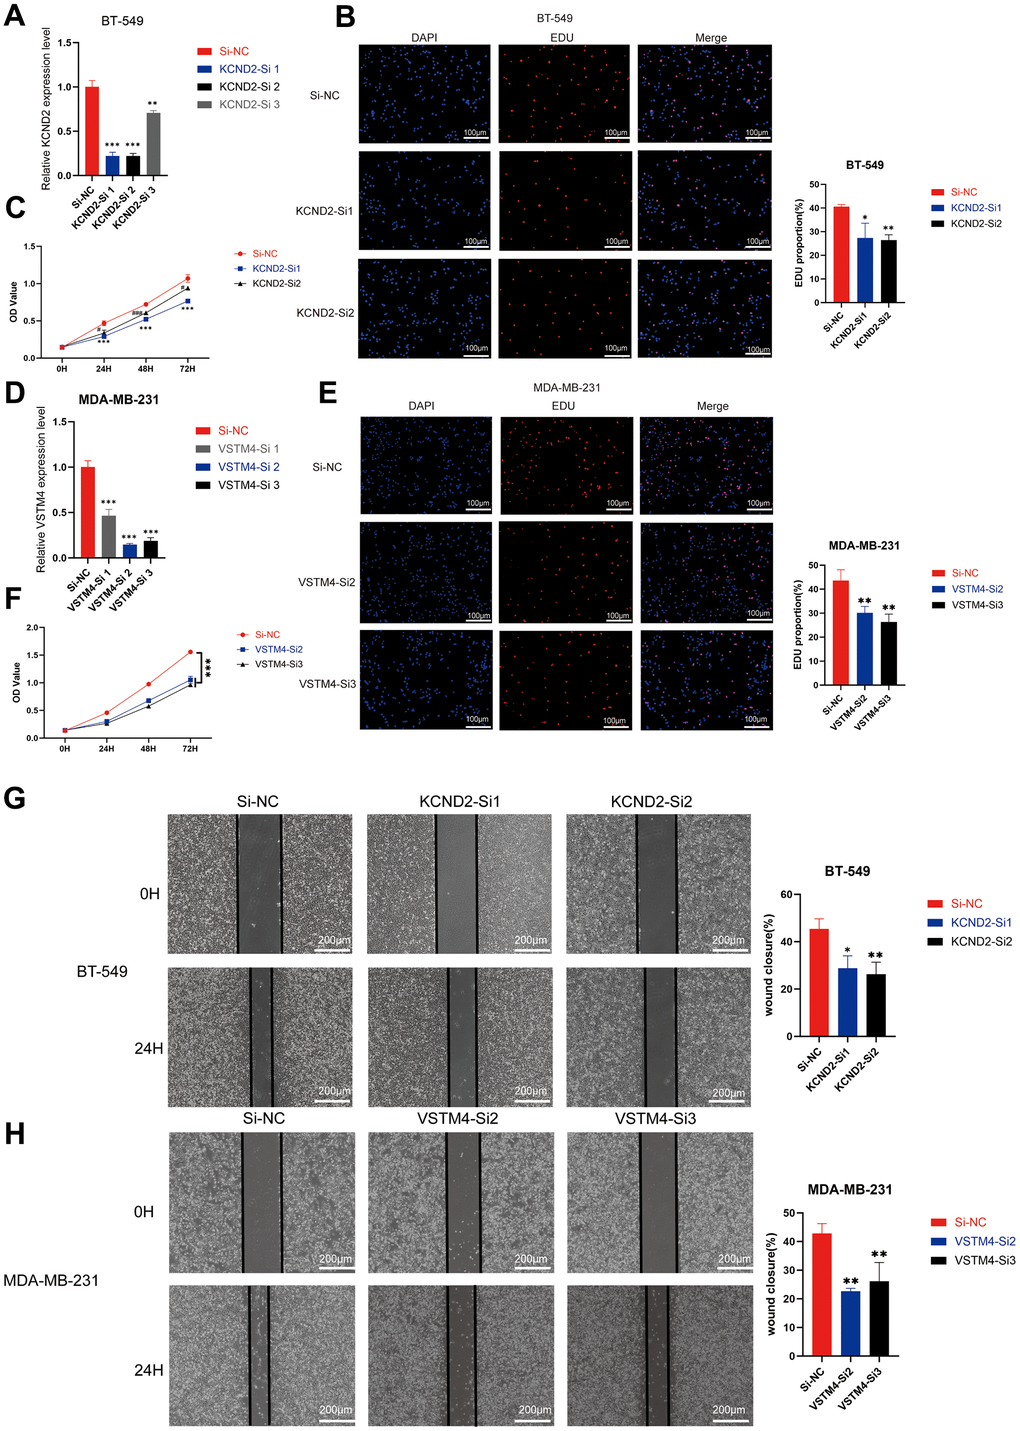 Depletion of KCND2 and VSTM4 reduces the proliferation and migration of TNBC cells in vitro. (A) The knockdown efficiency of siRNA targeting KCND2 in BT-549 cells was verified. (B) EdU incorporation analysis and (C) CCK-8 assay revealed that the knockdown of KCND2 affected the cell proliferation in BT-549 cells. (D) The knockdown efficiency of siRNA targeting VSTM4 in MDA-MB-231 cells was verified. (E) EdU incorporation analysis and (F) CCK-8 assay revealed that the knockdown of VSTM4 impacts cell proliferation in MDA-MB-231 cells. (G) The wound healing assay demonstrated that the knockdown of KCND2 affected the migration of BT-549 cells. (H) Wound healing assay results showed that the knockdown of VSTM4 impacted the migration of MDA-MB-231 cells. *P 